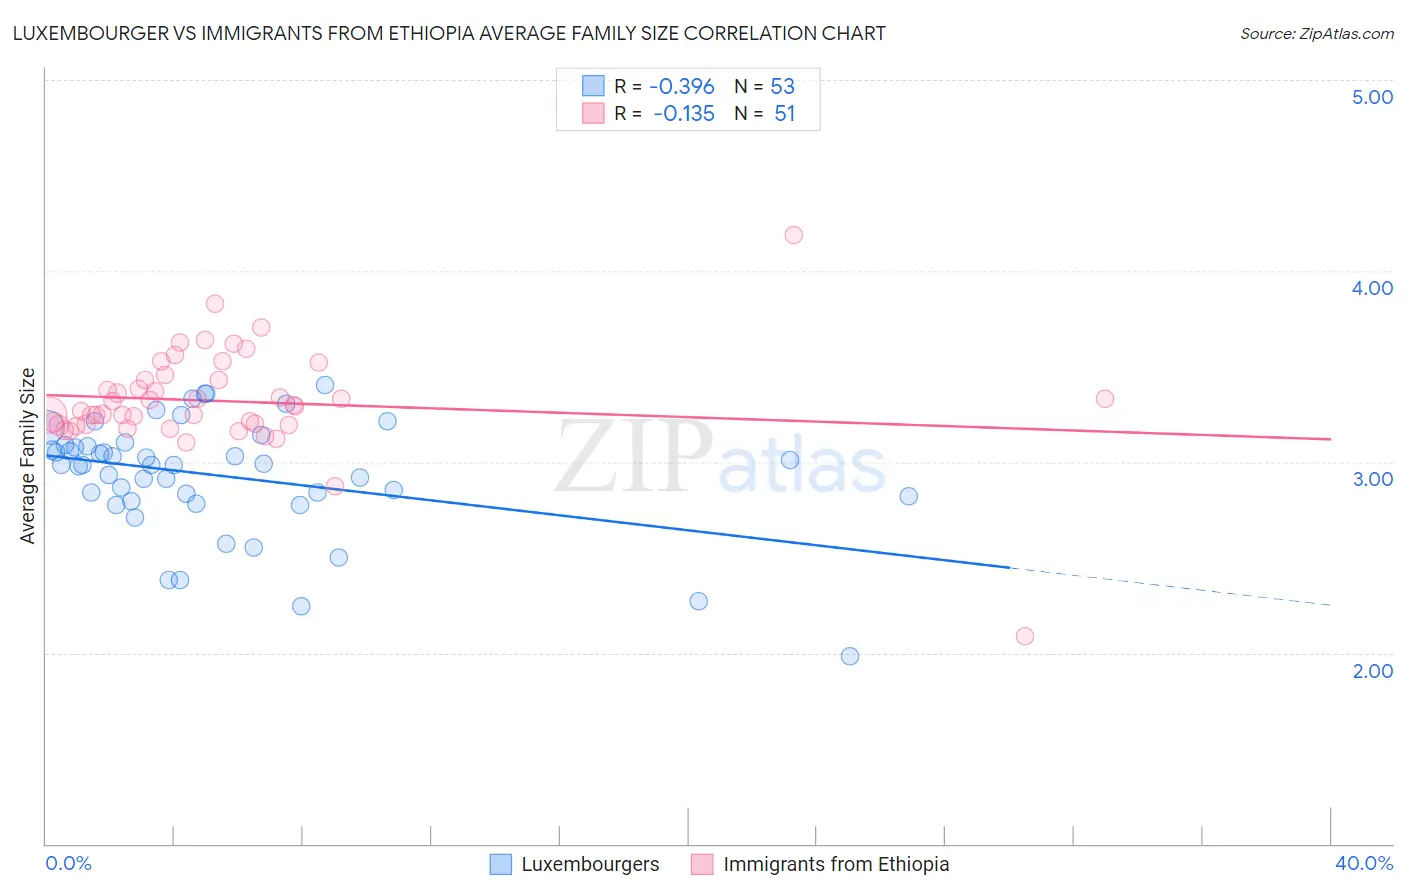 Luxembourger vs Immigrants from Ethiopia Average Family Size